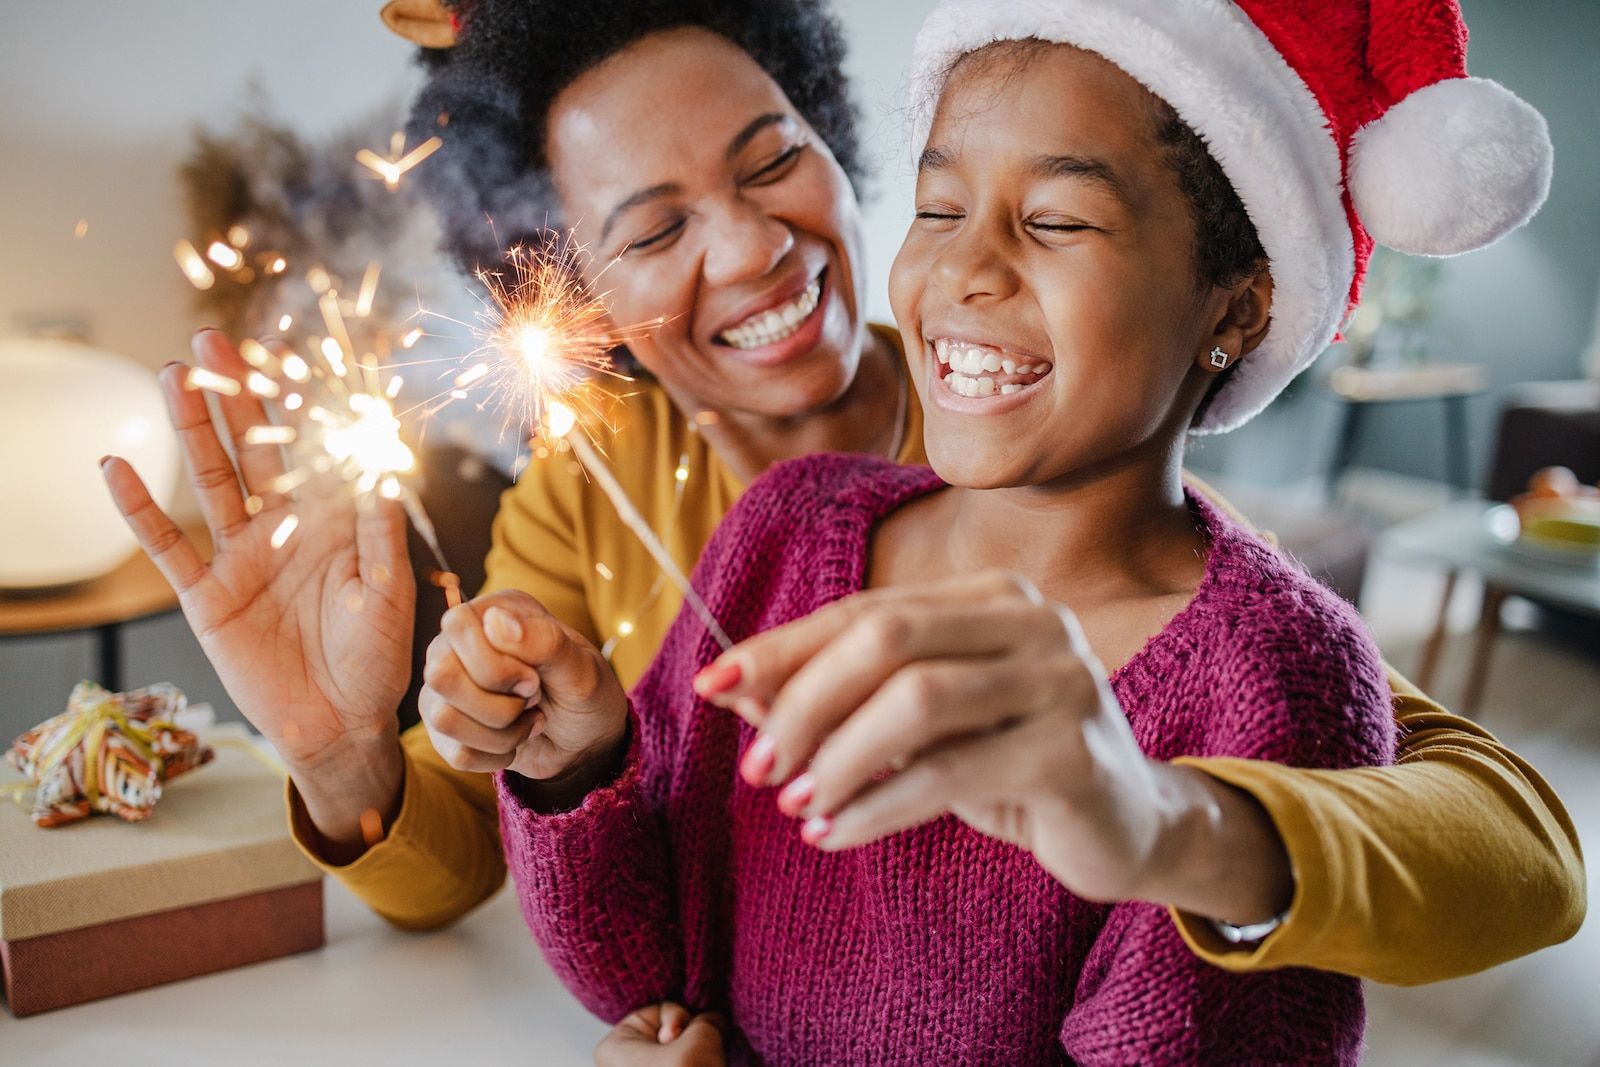 How to help kids set healthy New Year’s resolutions, according to experts